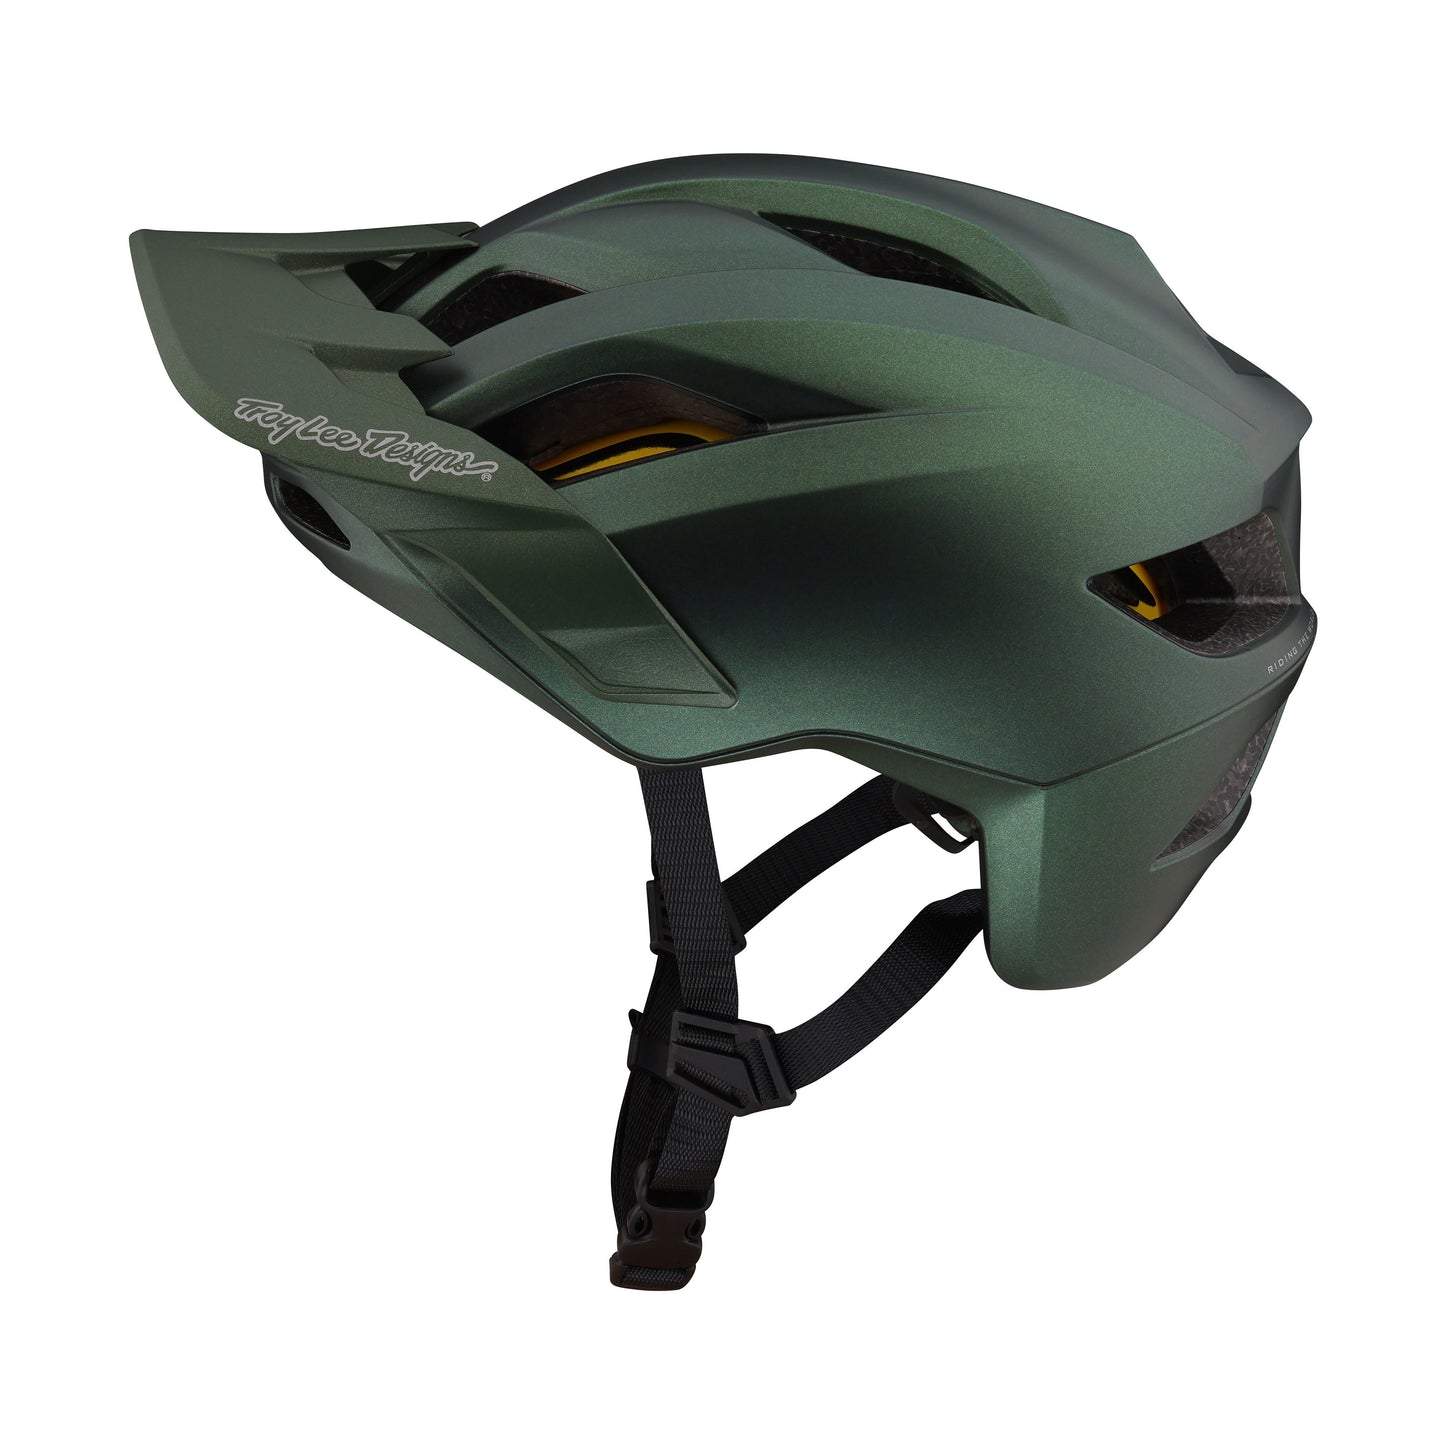 TLD Flowline MIPS Youth Helmet - Youth - One Size Fits Most - Orbit Forest Green